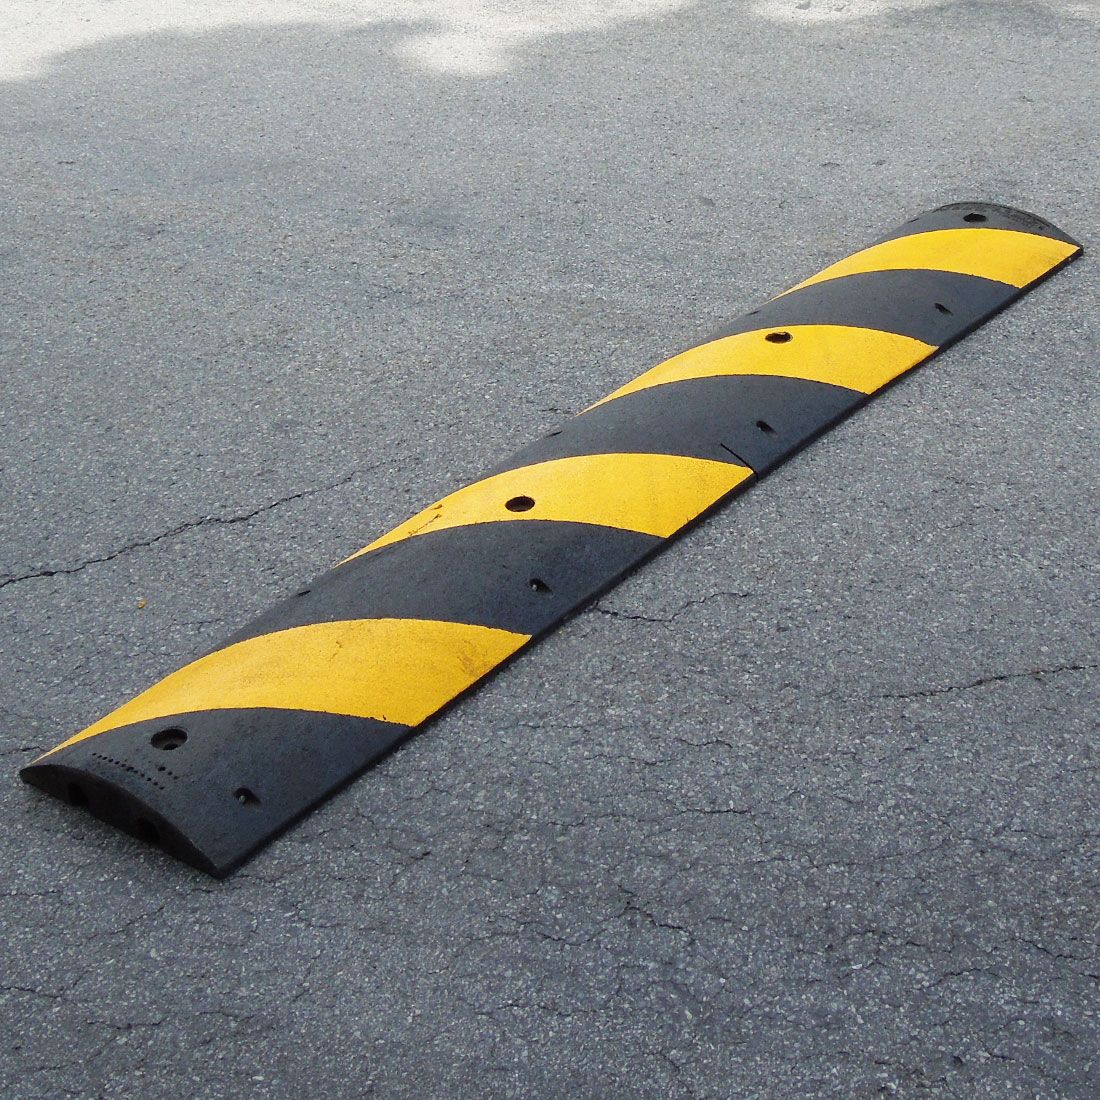 https://trafficsafetyproducts.net/media/catalog/product/cache/ccc19f009fc921588ff46f7c0b2c29fb/R/e/Recycled-Rubber-Speed-Bump.jpg